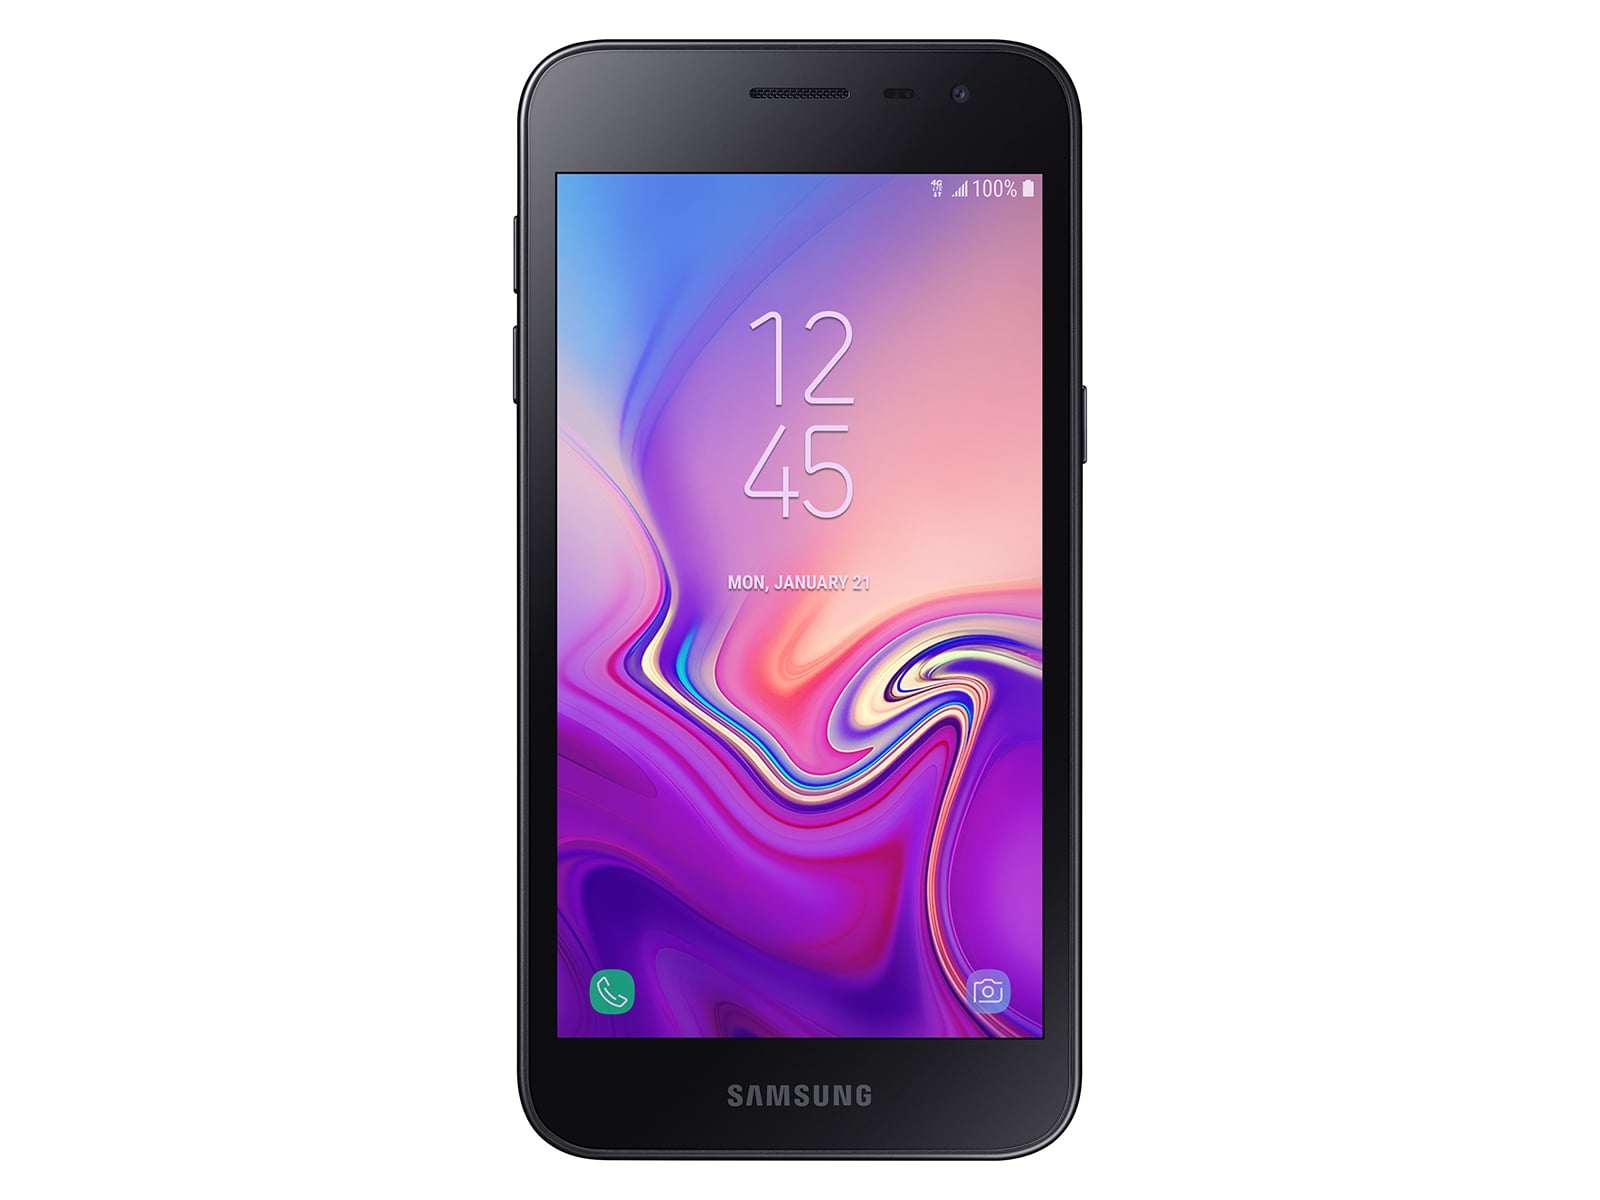 SAMSUNG GALAXY J2 PRO Photos, Images and Wallpapers - MouthShut.com